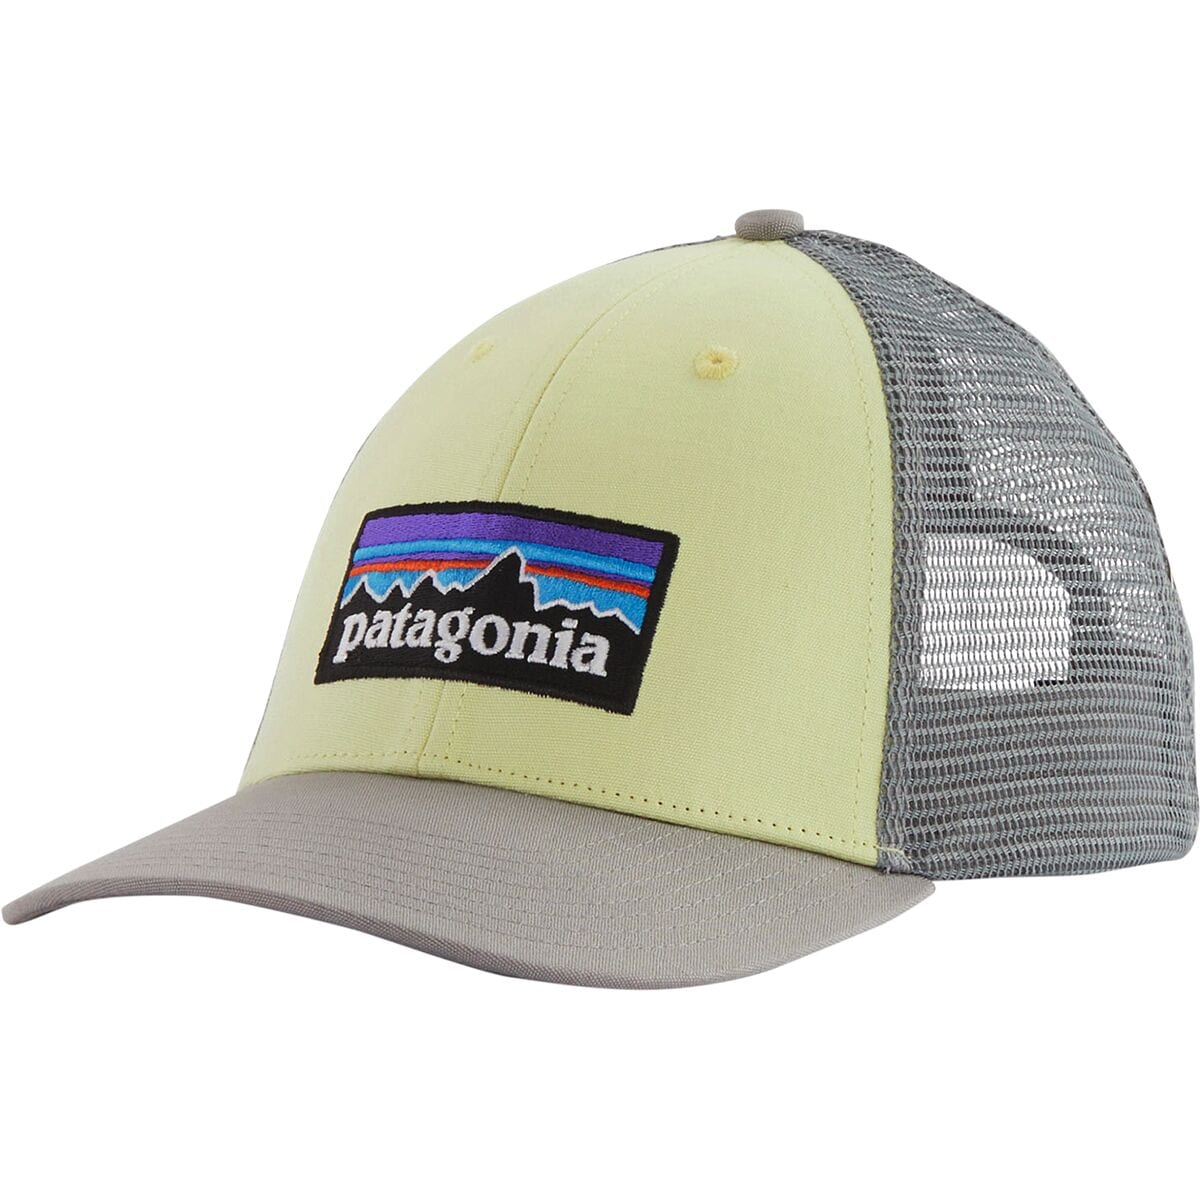 Patagonia P6 LoPro Trucker Hat - Accessories | Backcountry